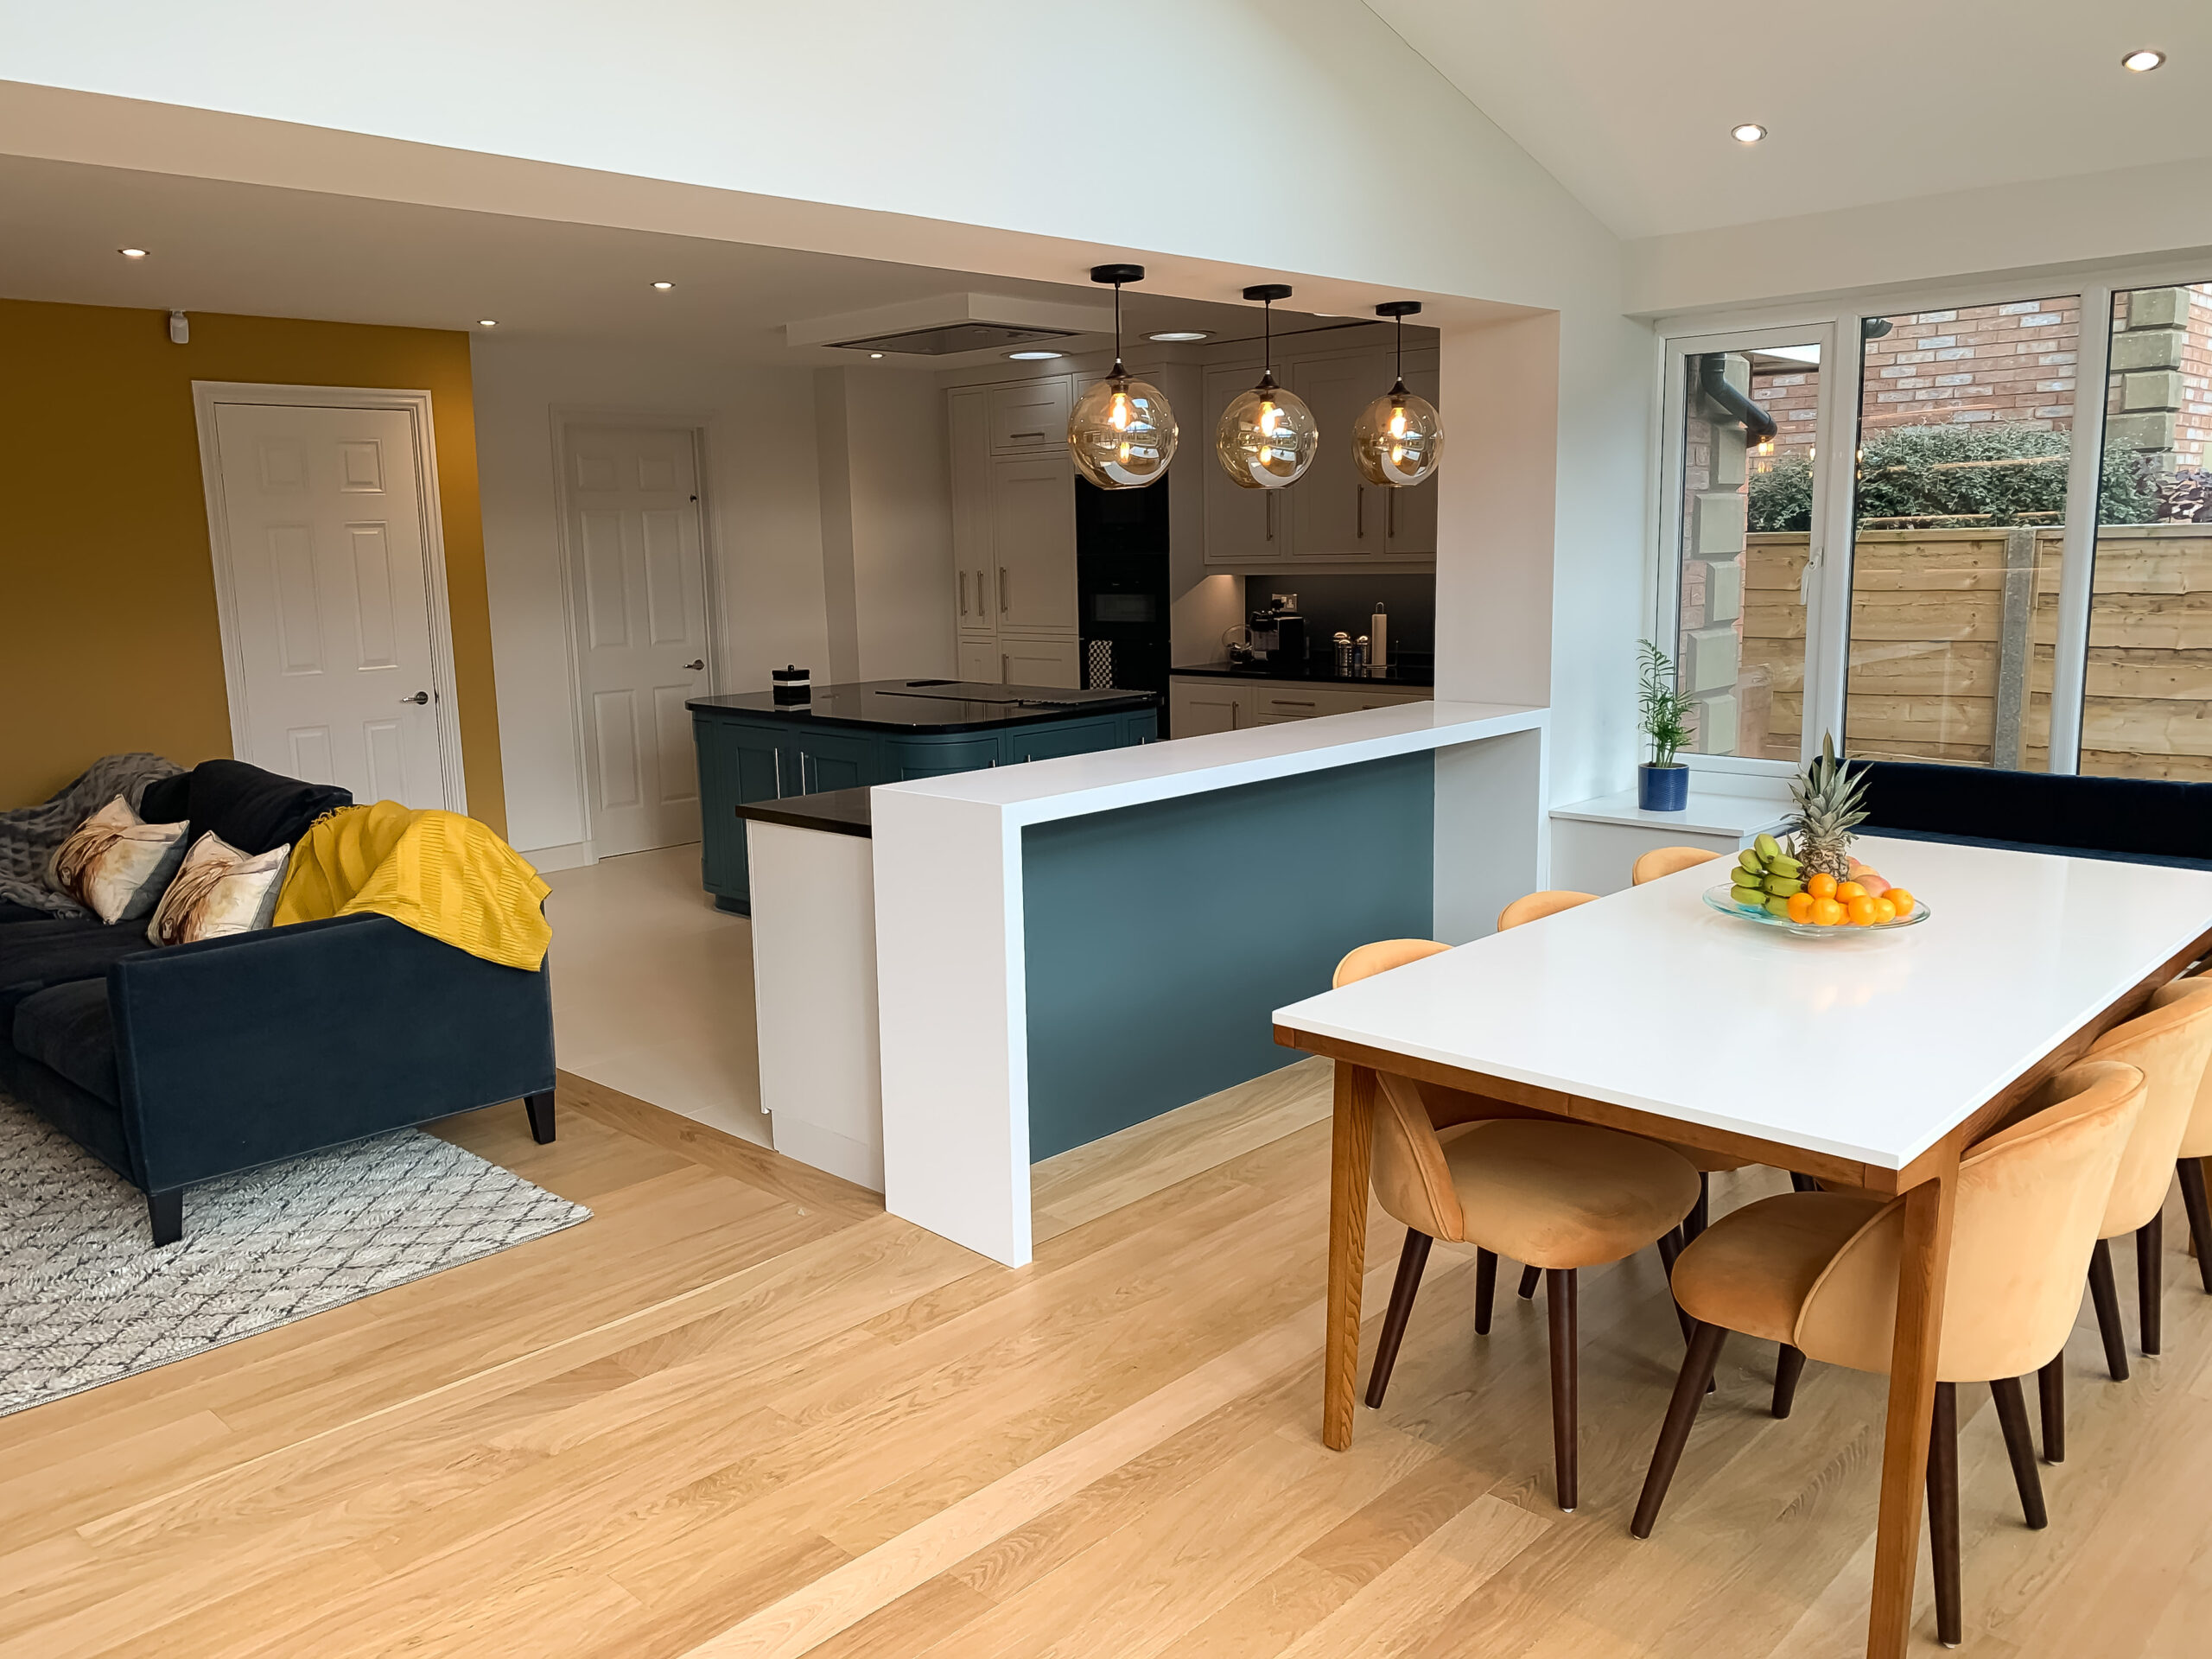 Kitchen diner full room view in contemporary style in High Leigh